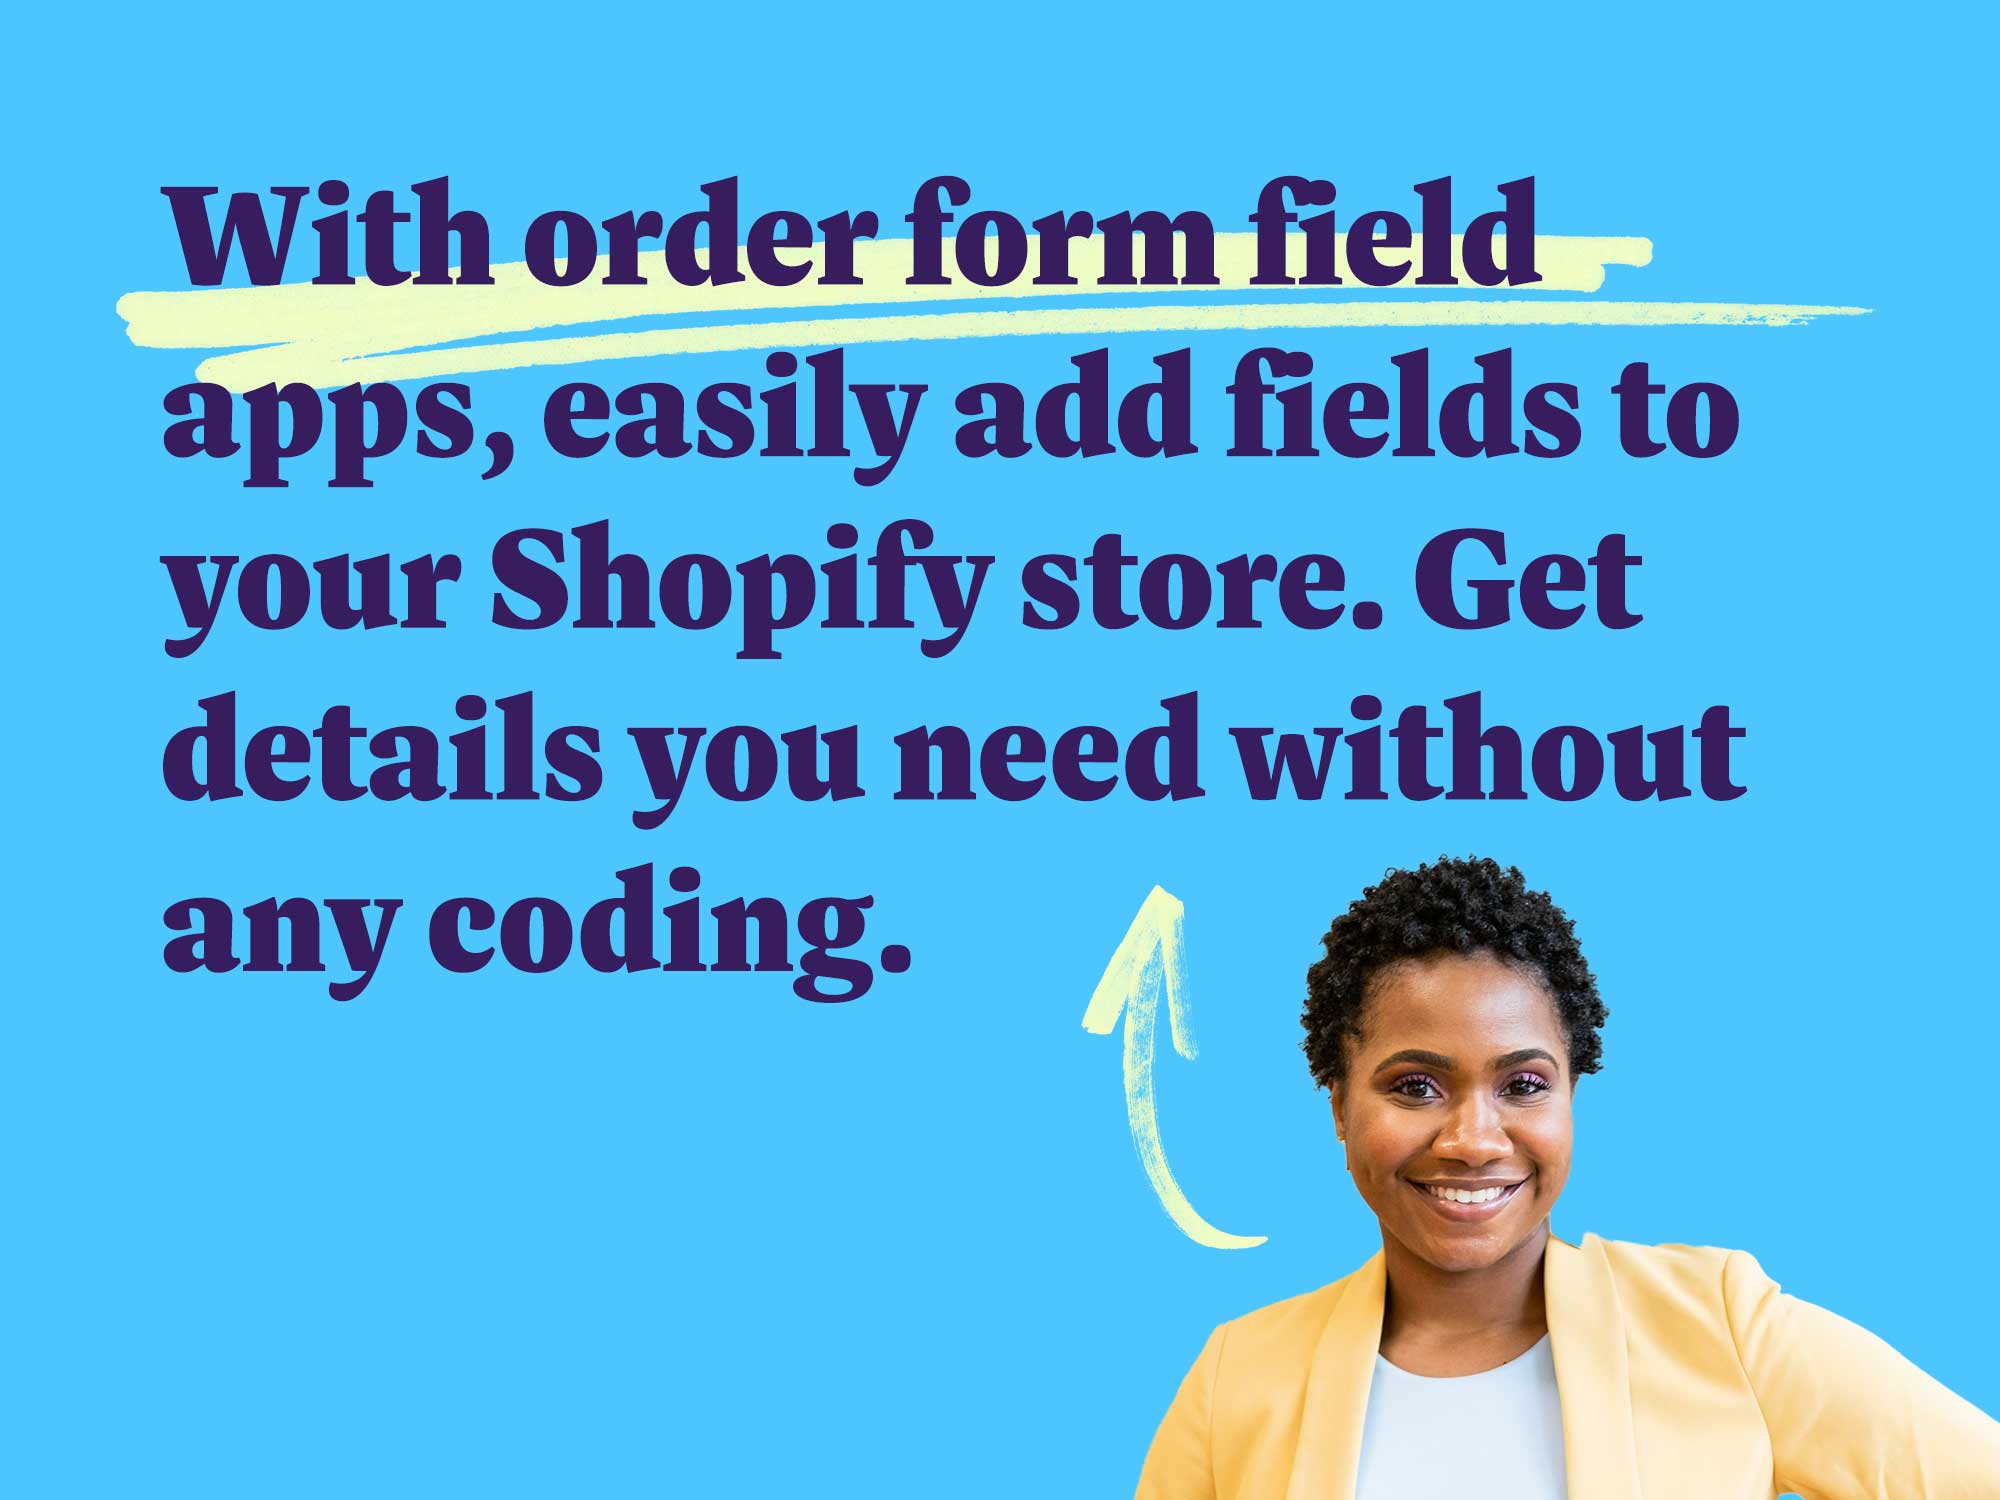 With order form field apps, easily add fields to your Shopify store. Get details you need without any coding.